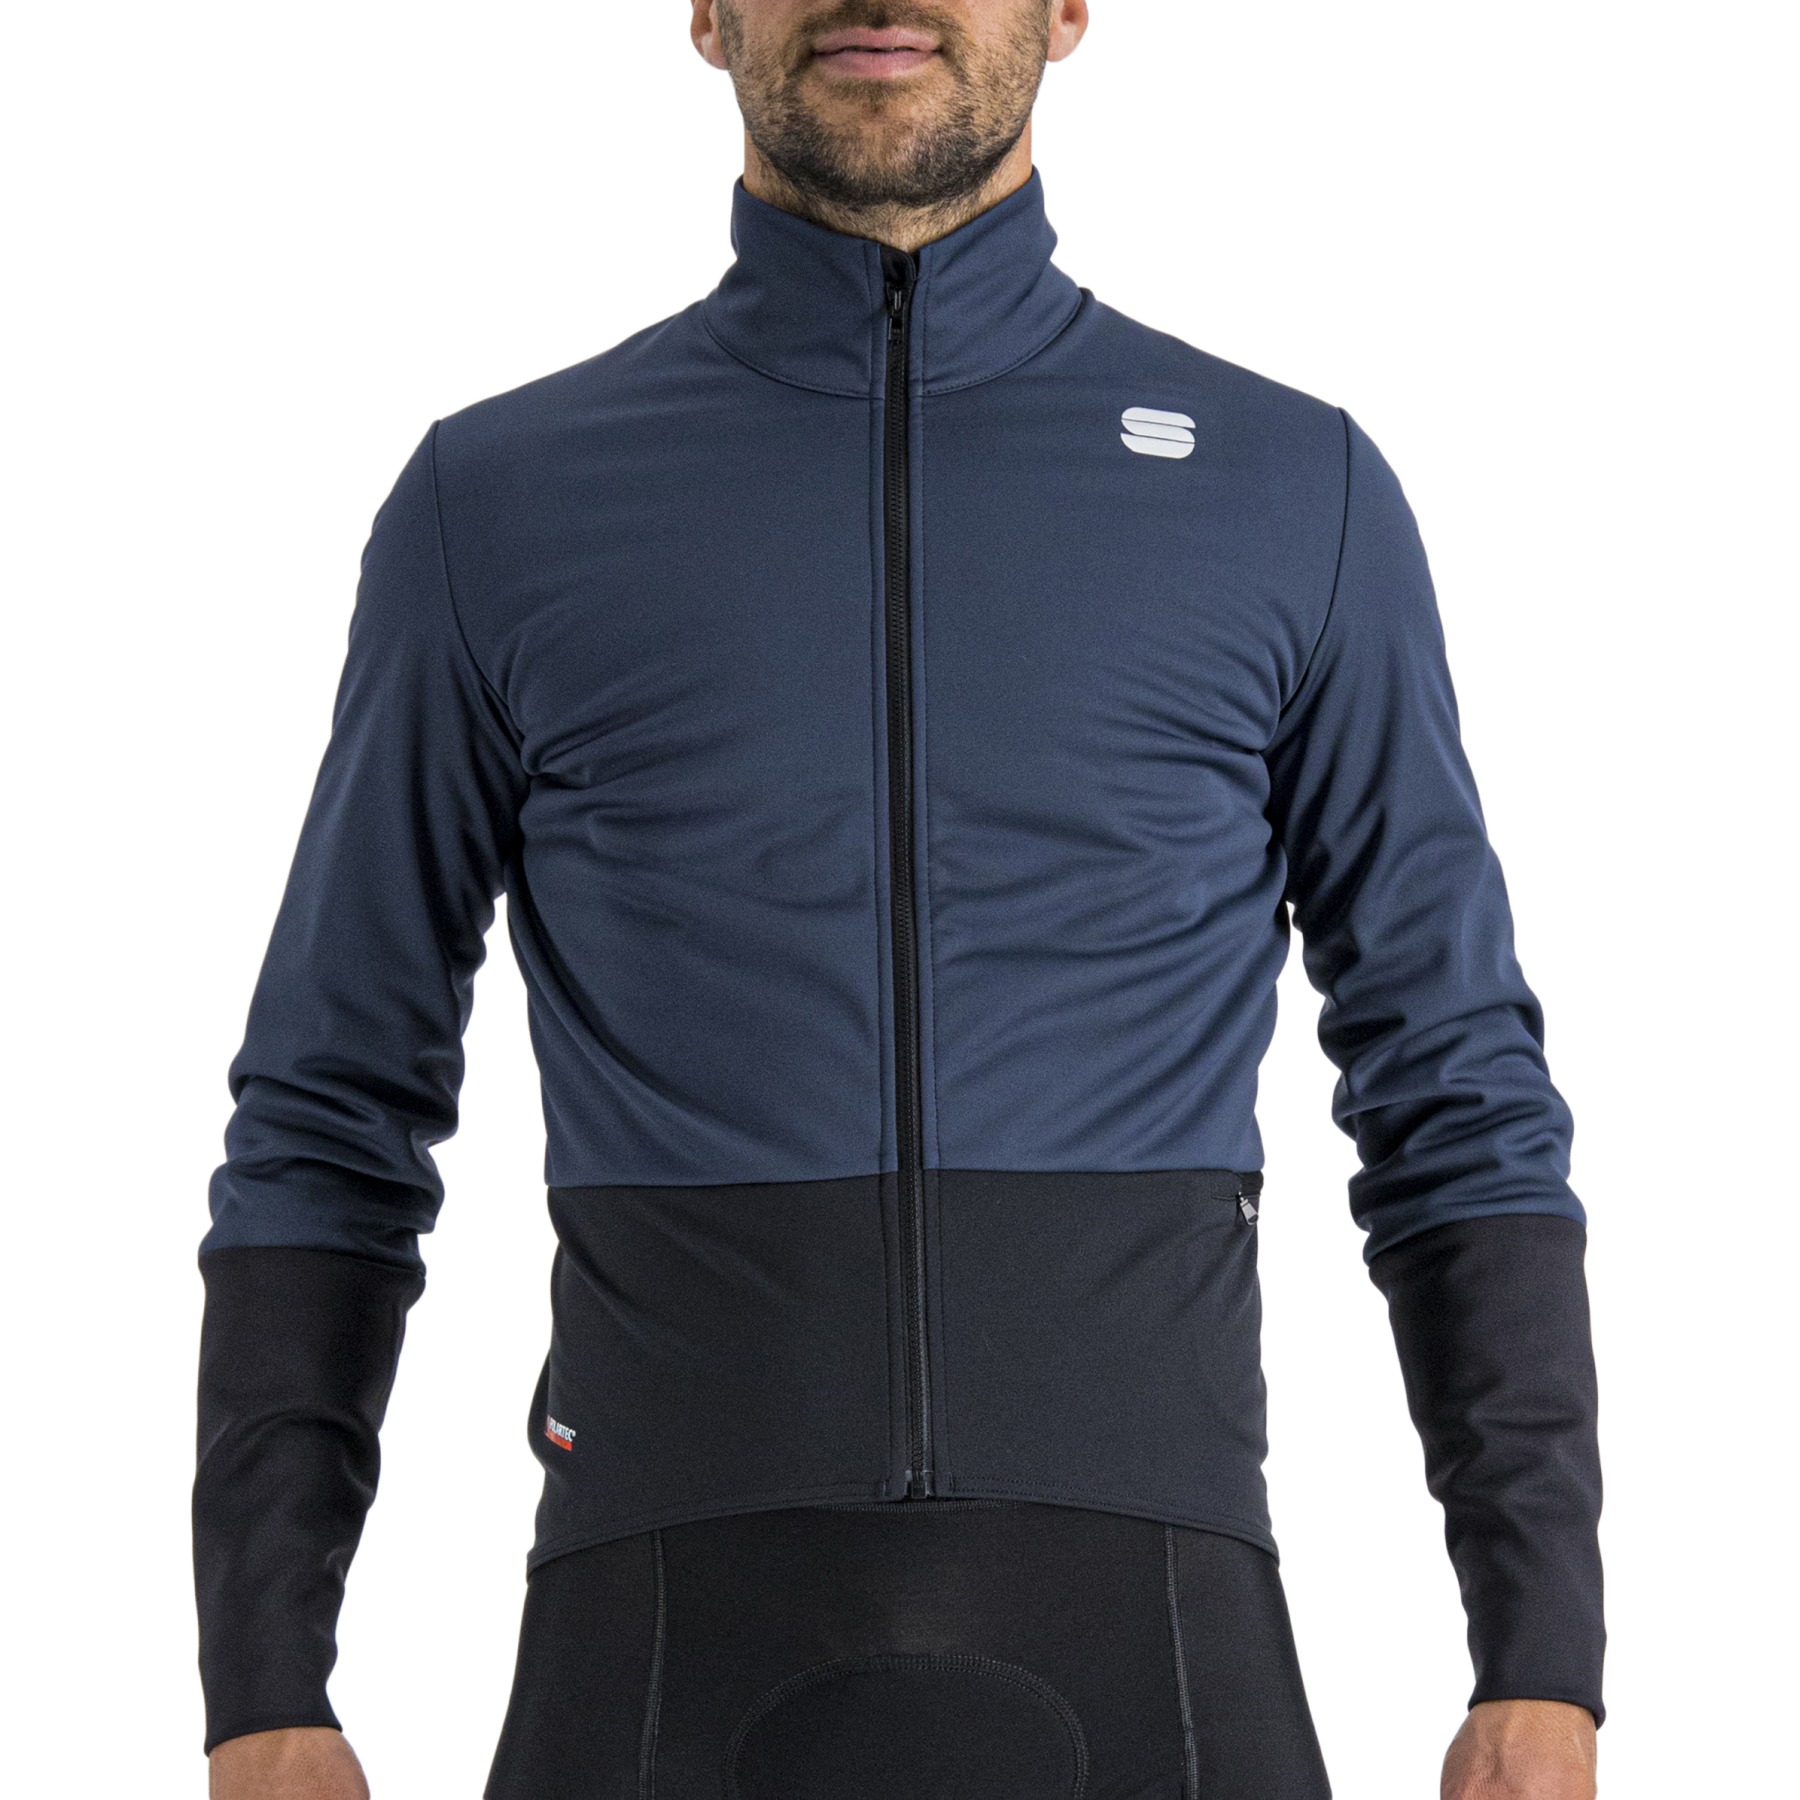 Picture of Sportful Total Comfort Bike Jacket - 456 Galaxy Blue